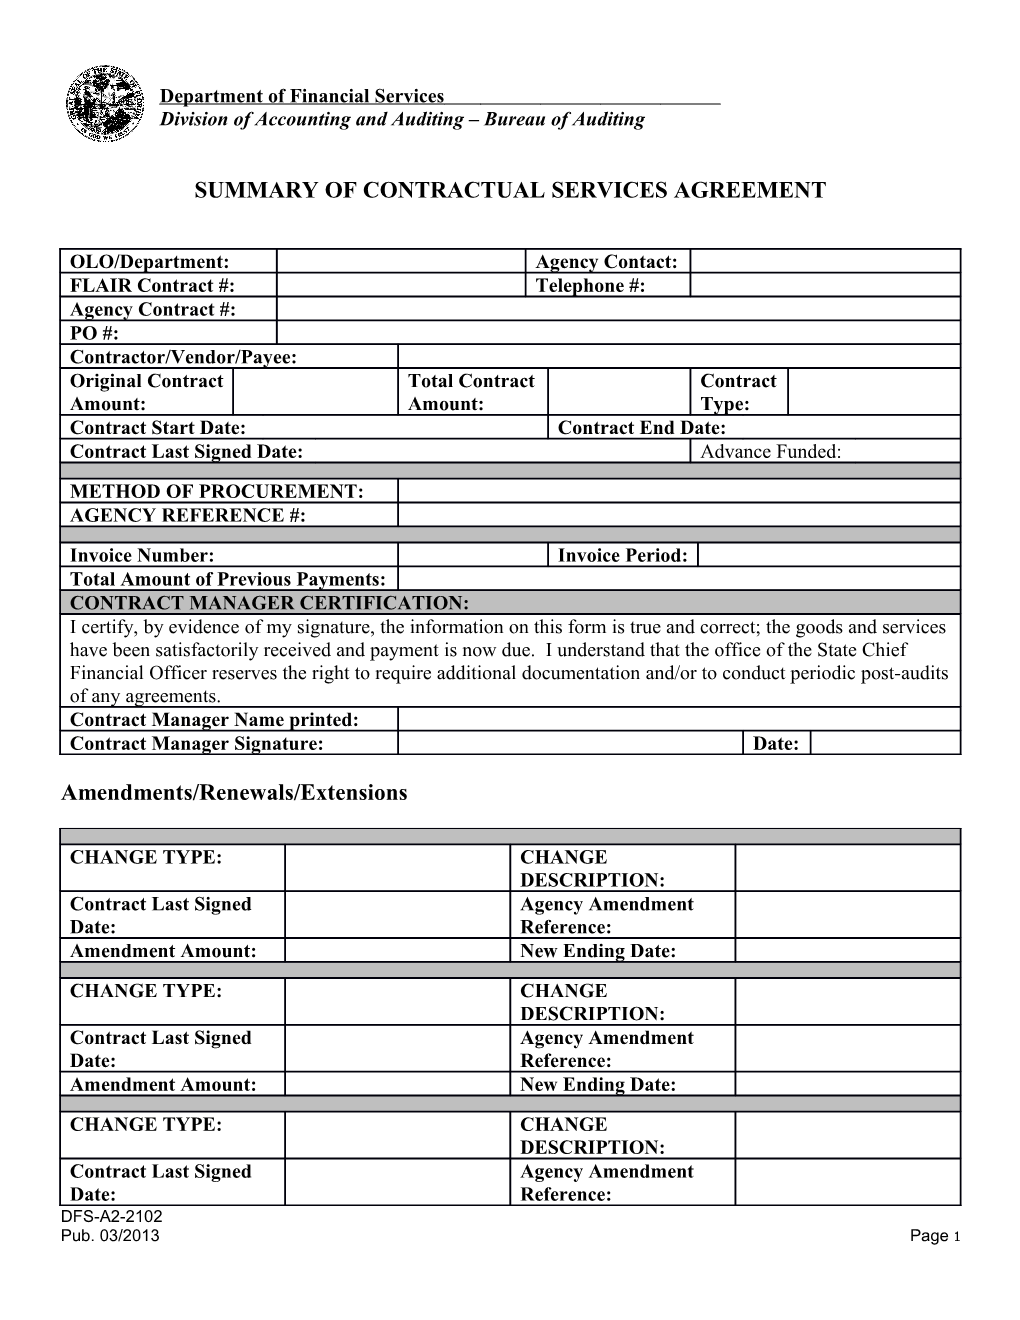 Summary of Contractual Services Agreement/Purchase Order